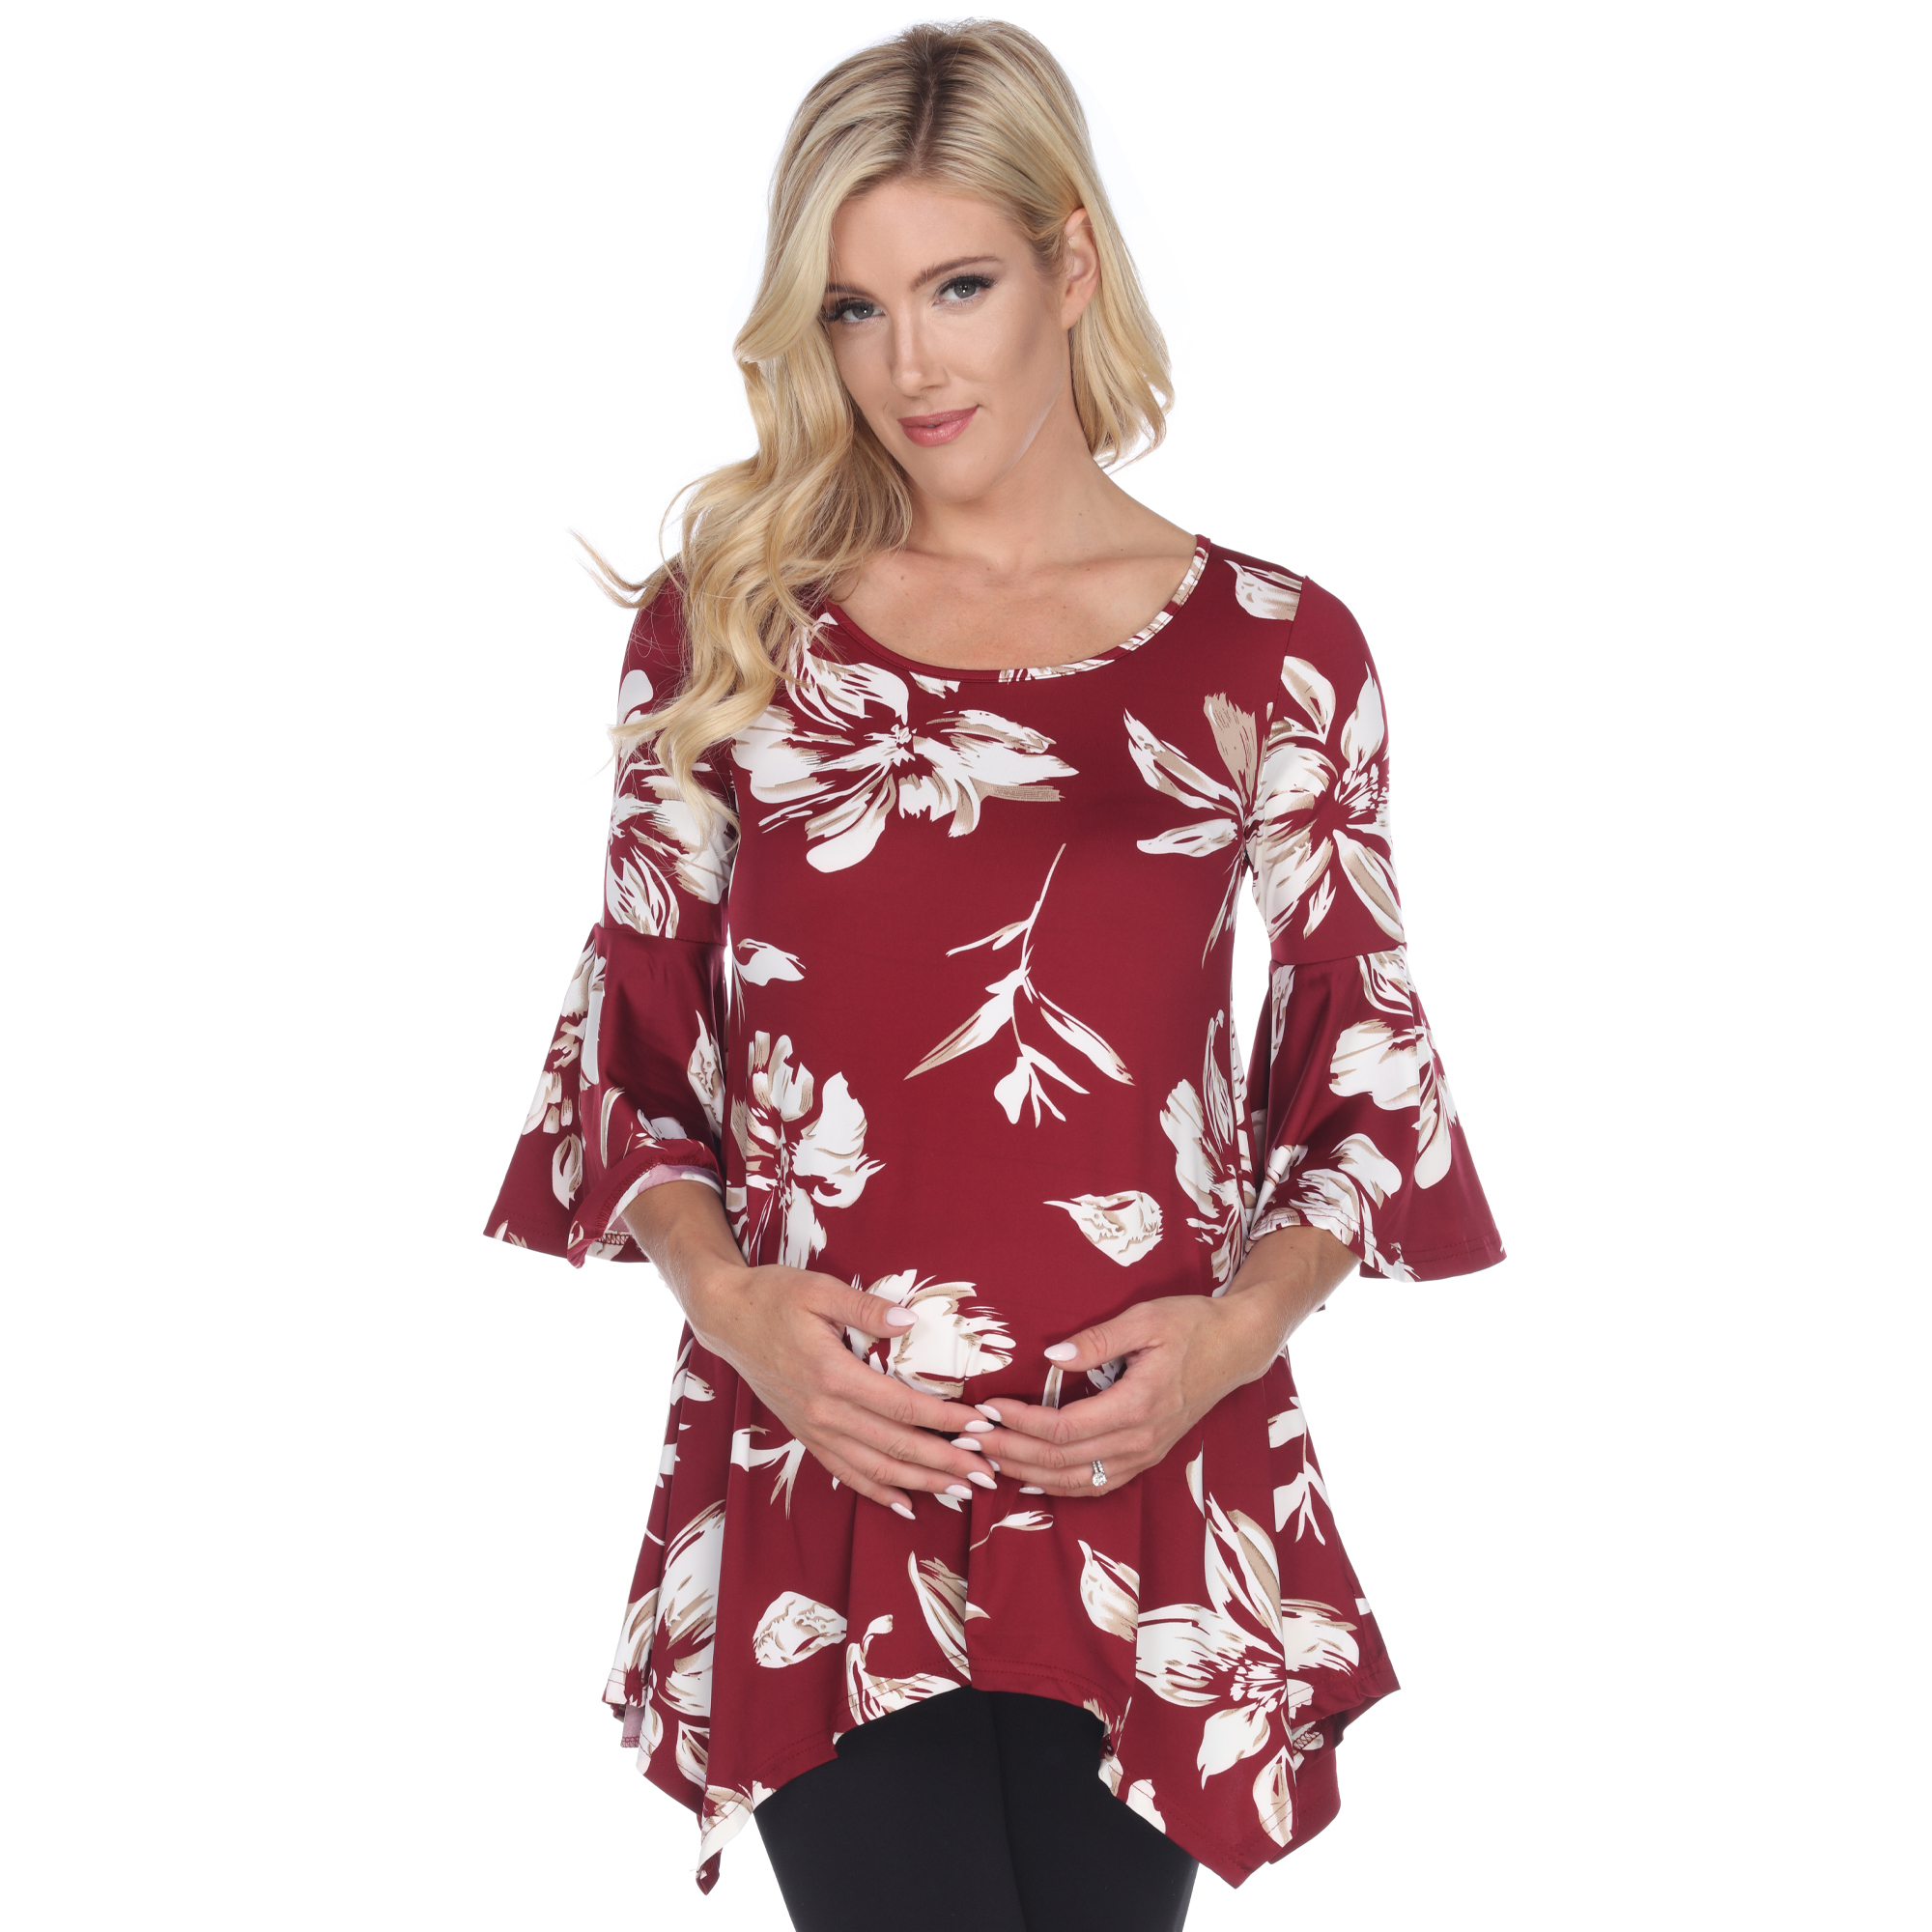 White Mark Women's Maternity Floral Print Quarter Sleeve Tunic Top With Pockets - Navy, X-Large